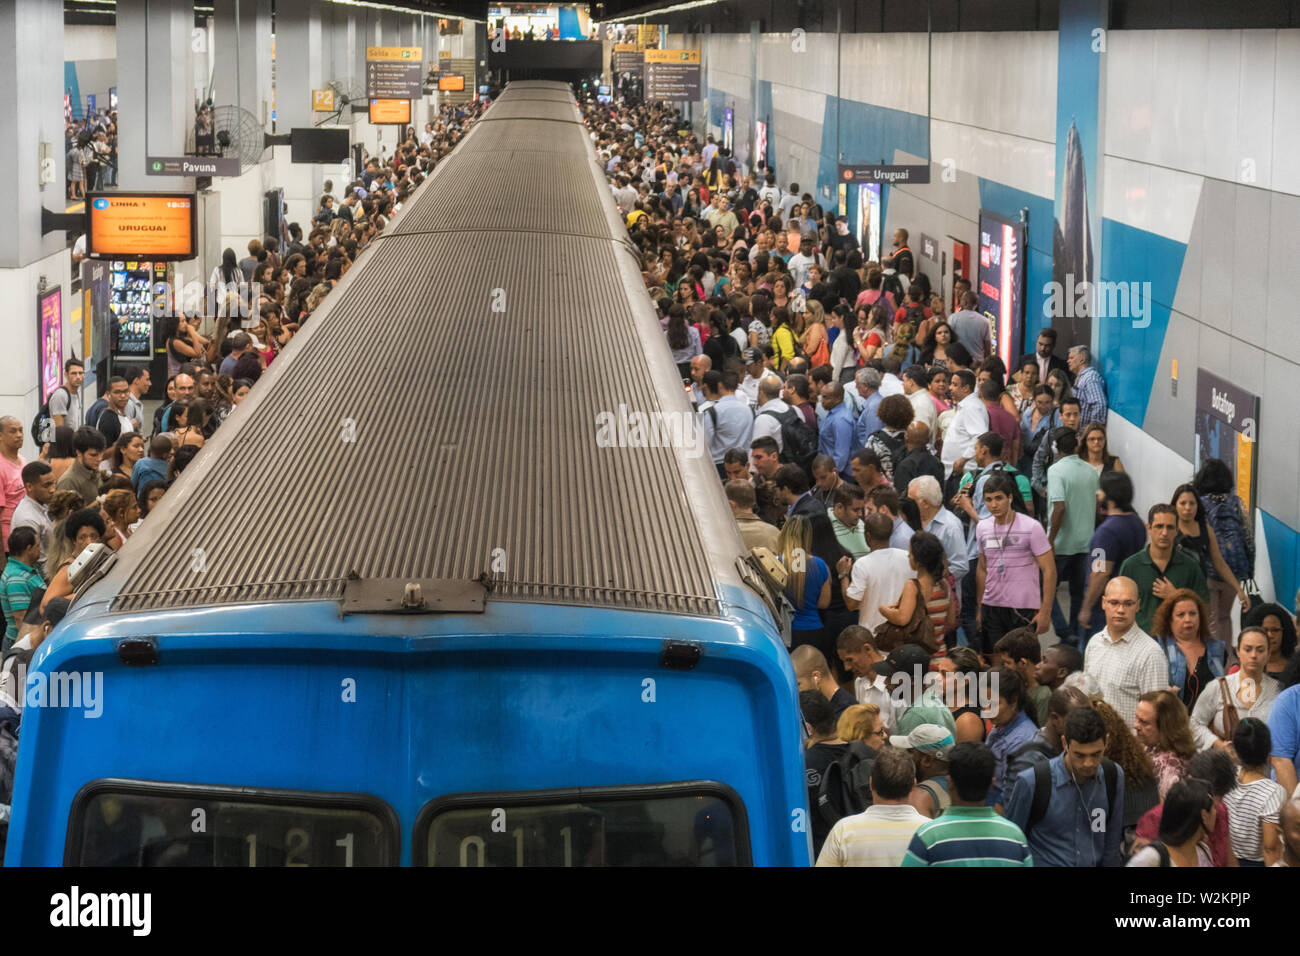 Rio de Janeiro, Brazil - November 07, 2016: a crowd of people at the Botafogo metro station at rush hour to get back home after a working day Stock Photo